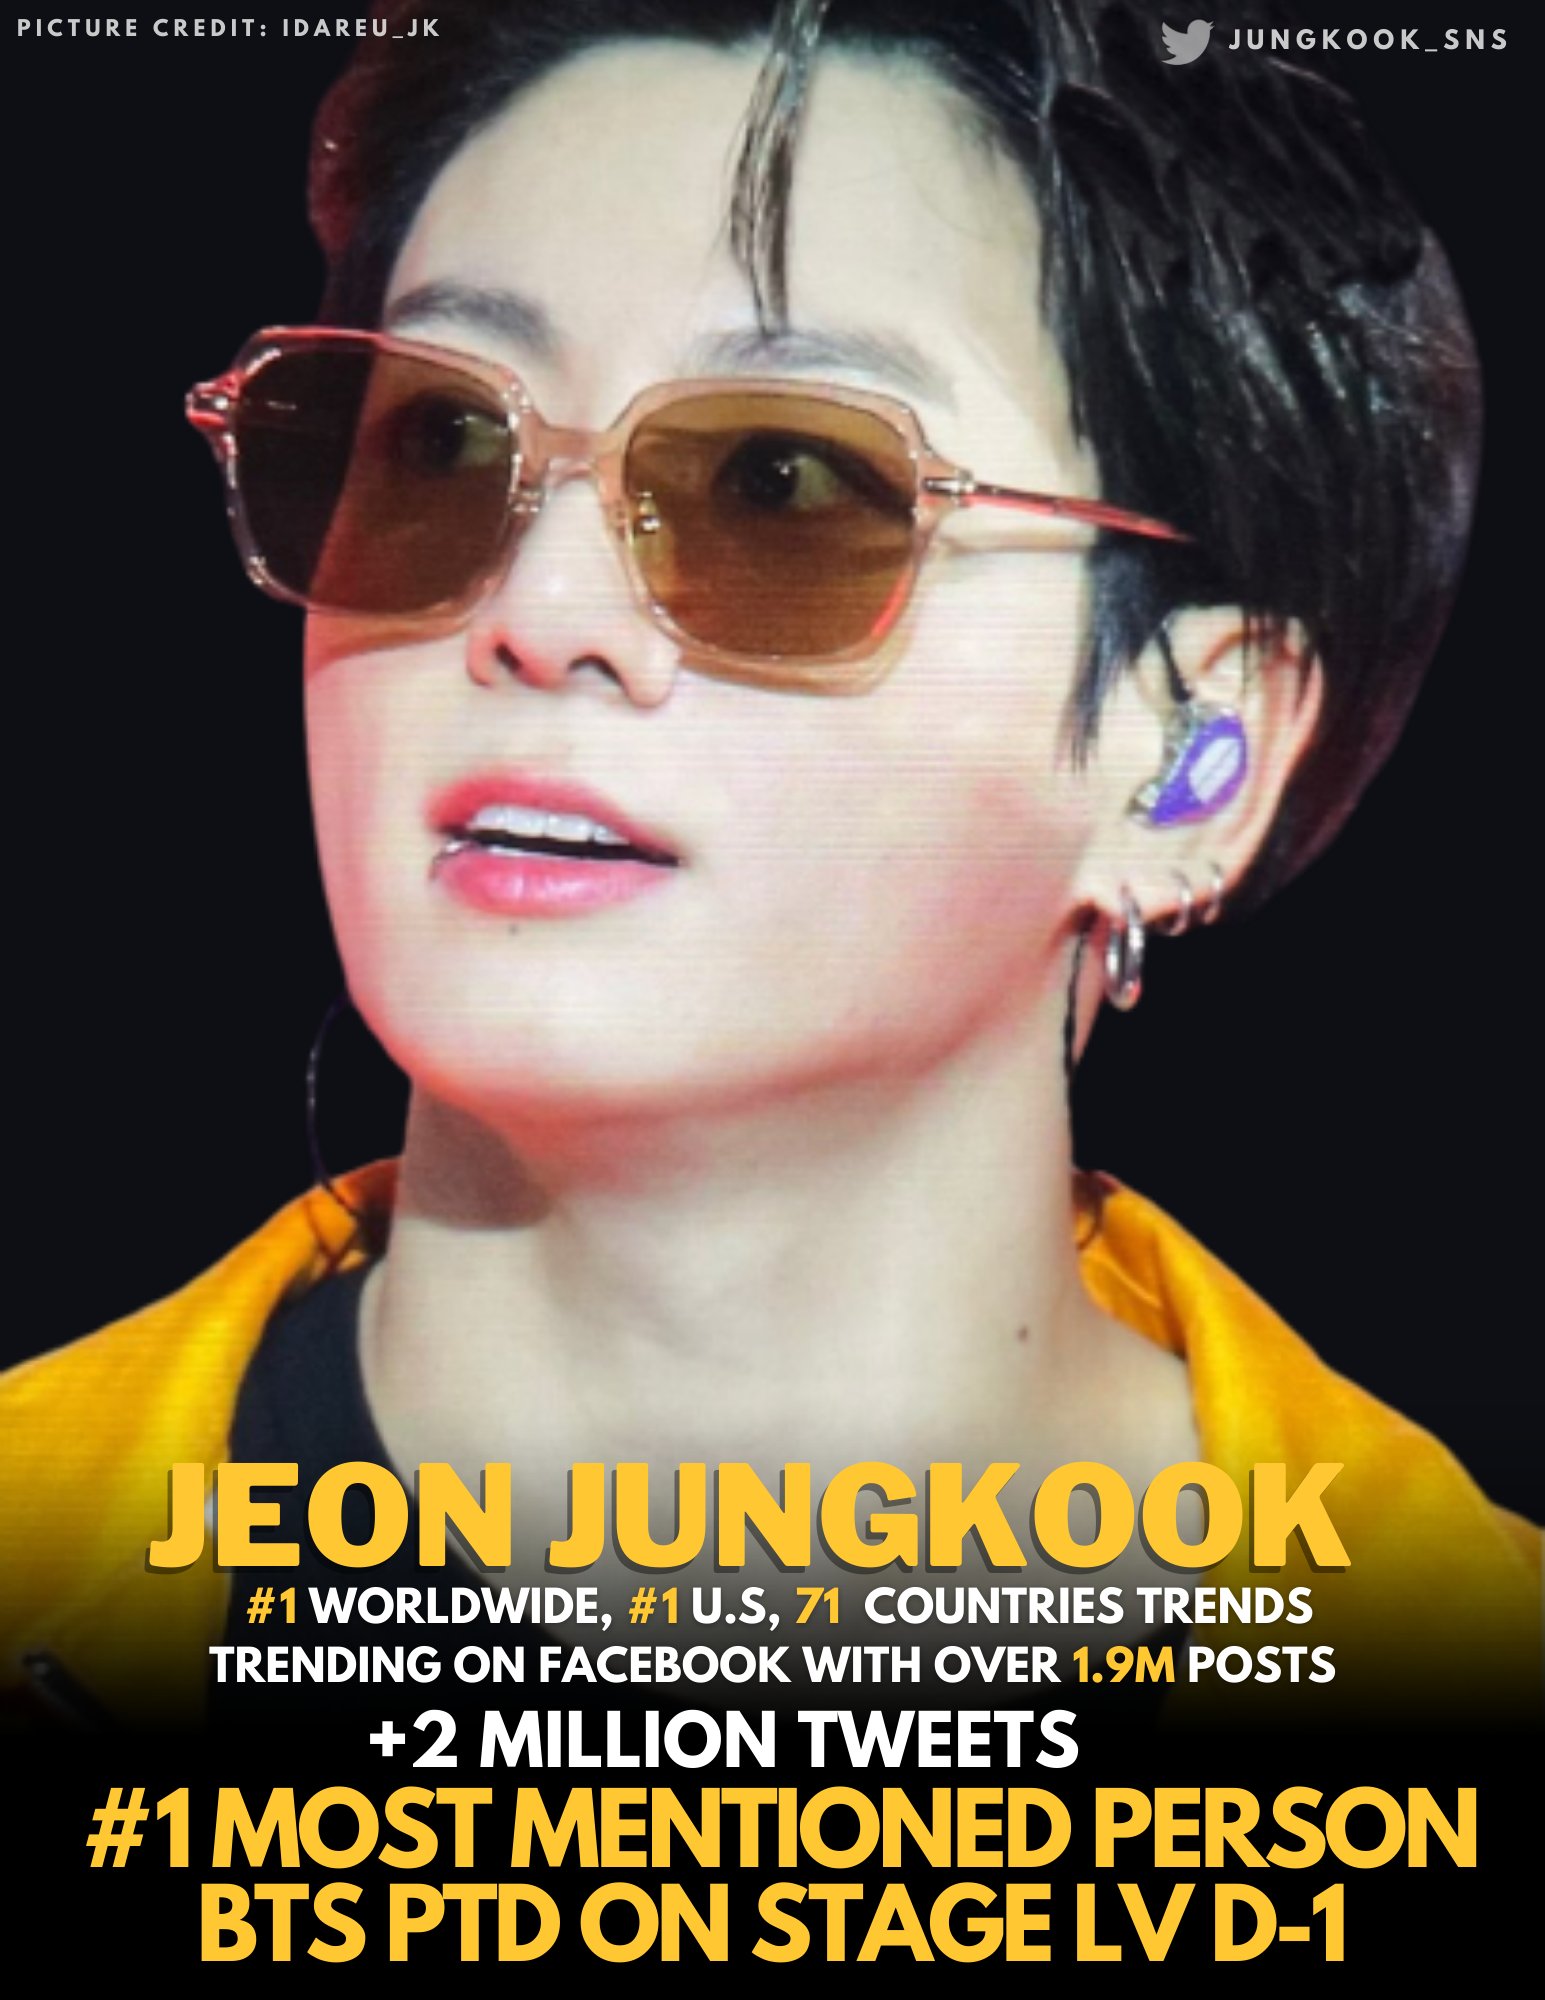 Jungkook SNS  on X: Jungkook was the Most Mentioned Person on